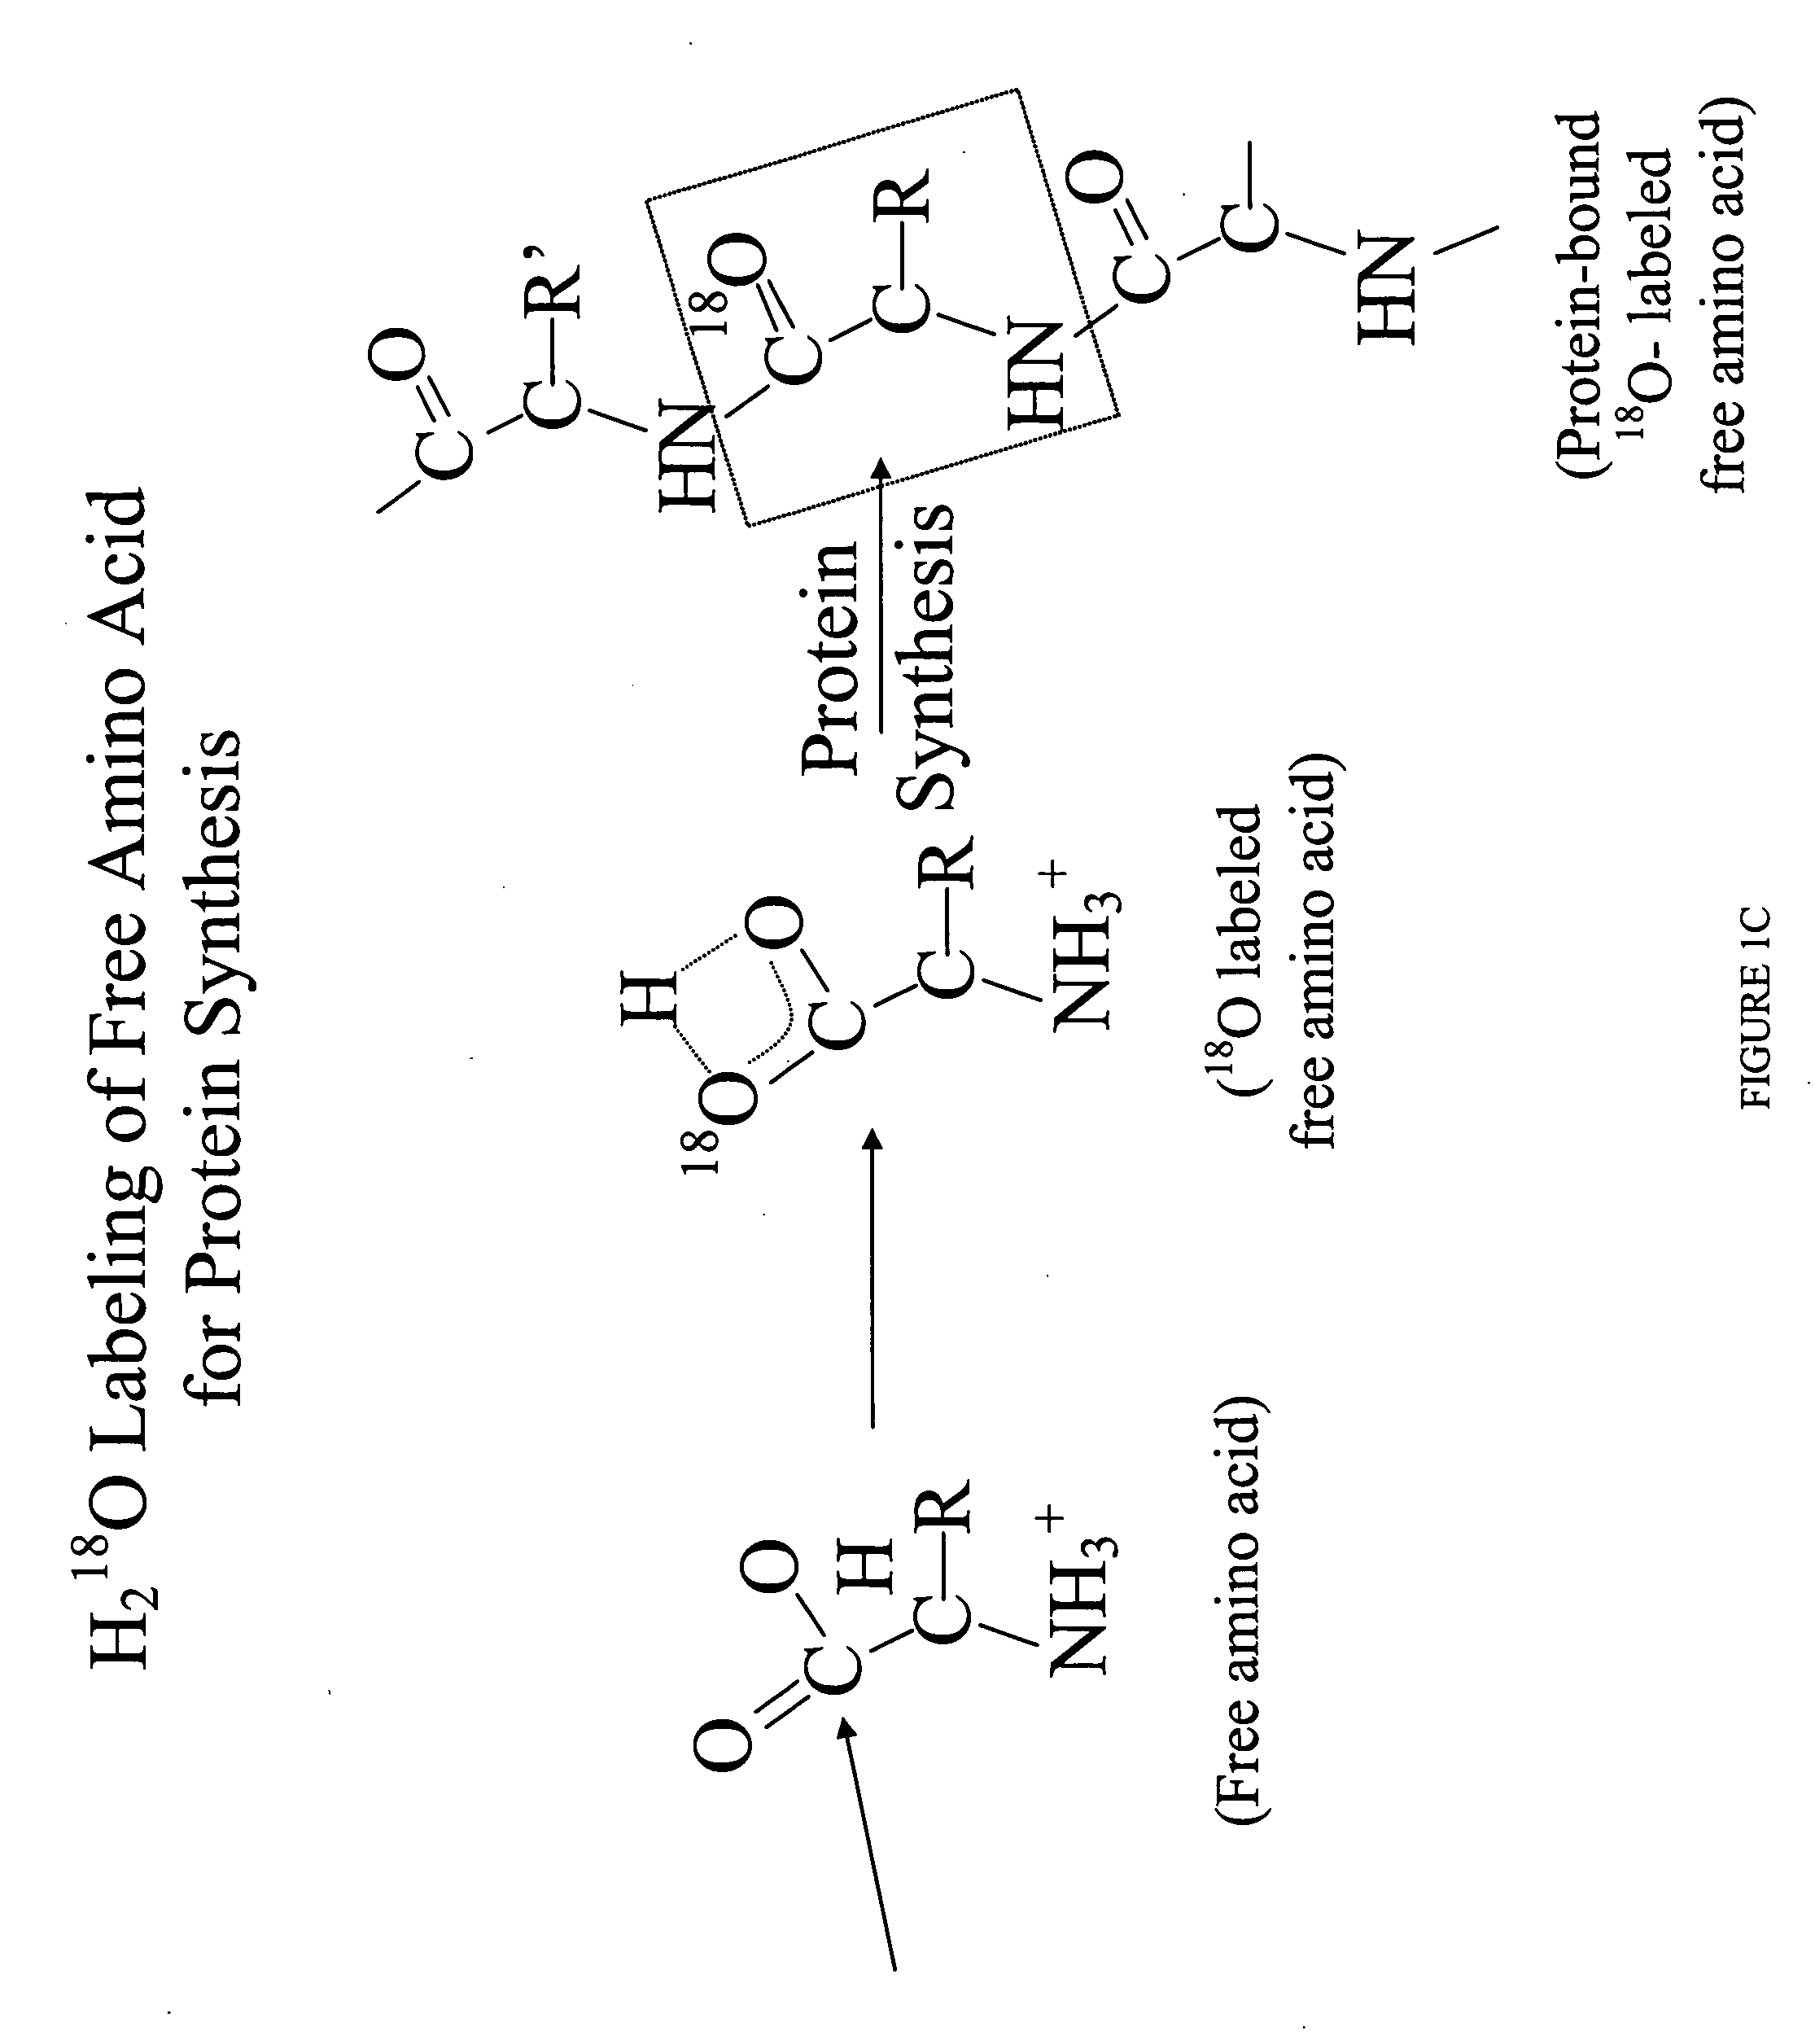 Methods for comparing relative flux rates of two or more biological molecules in vivo through a single protocol